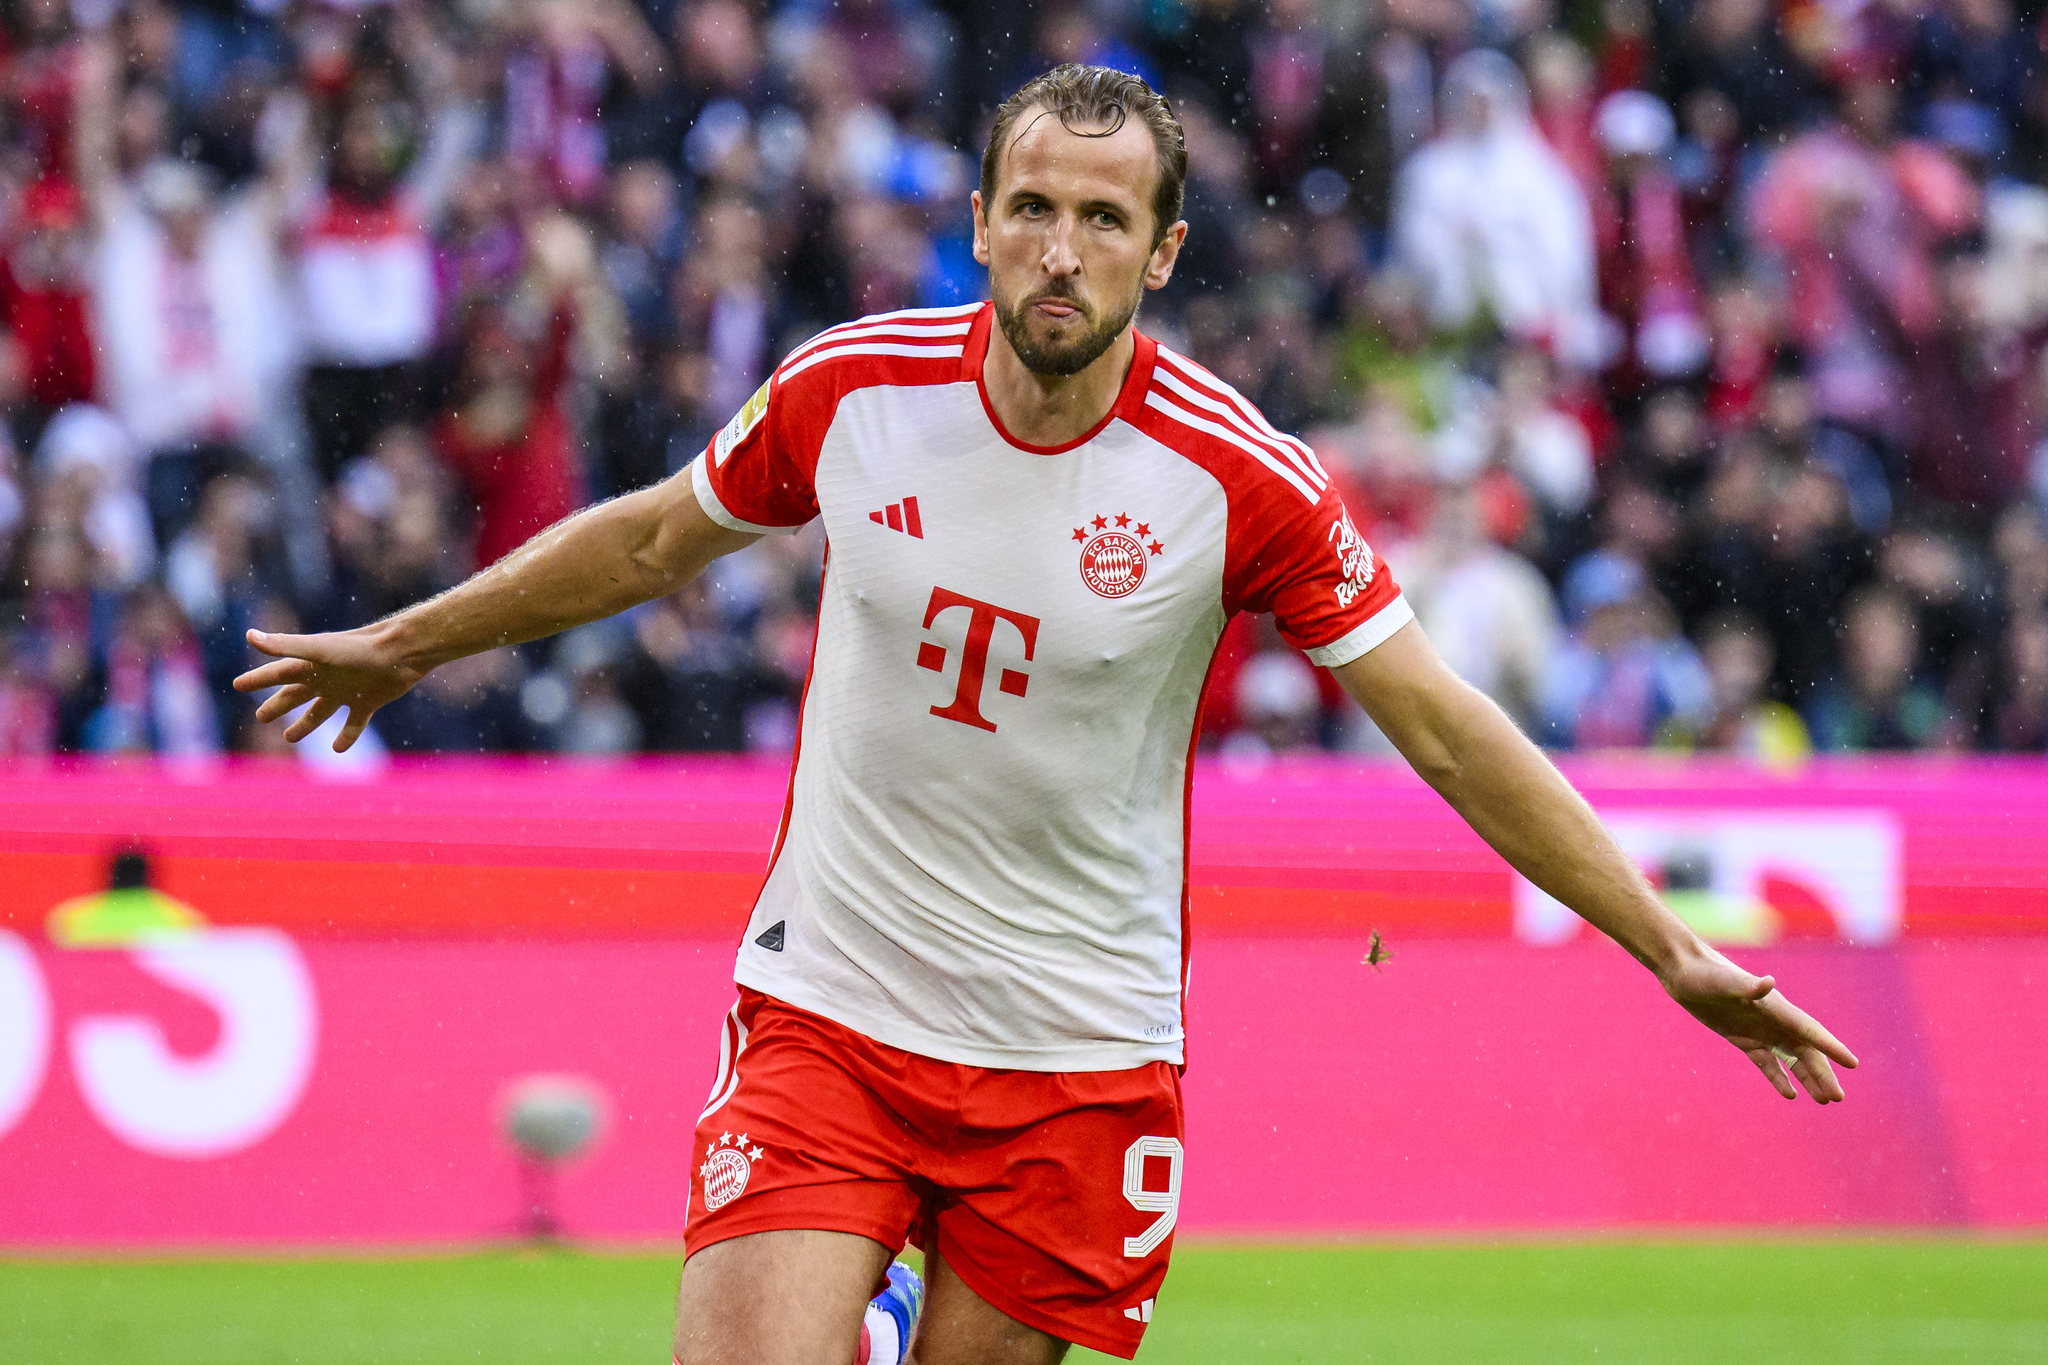  Harry Kane celebrates by spreading his arms wide after scoring a goal for Bayern Munich.